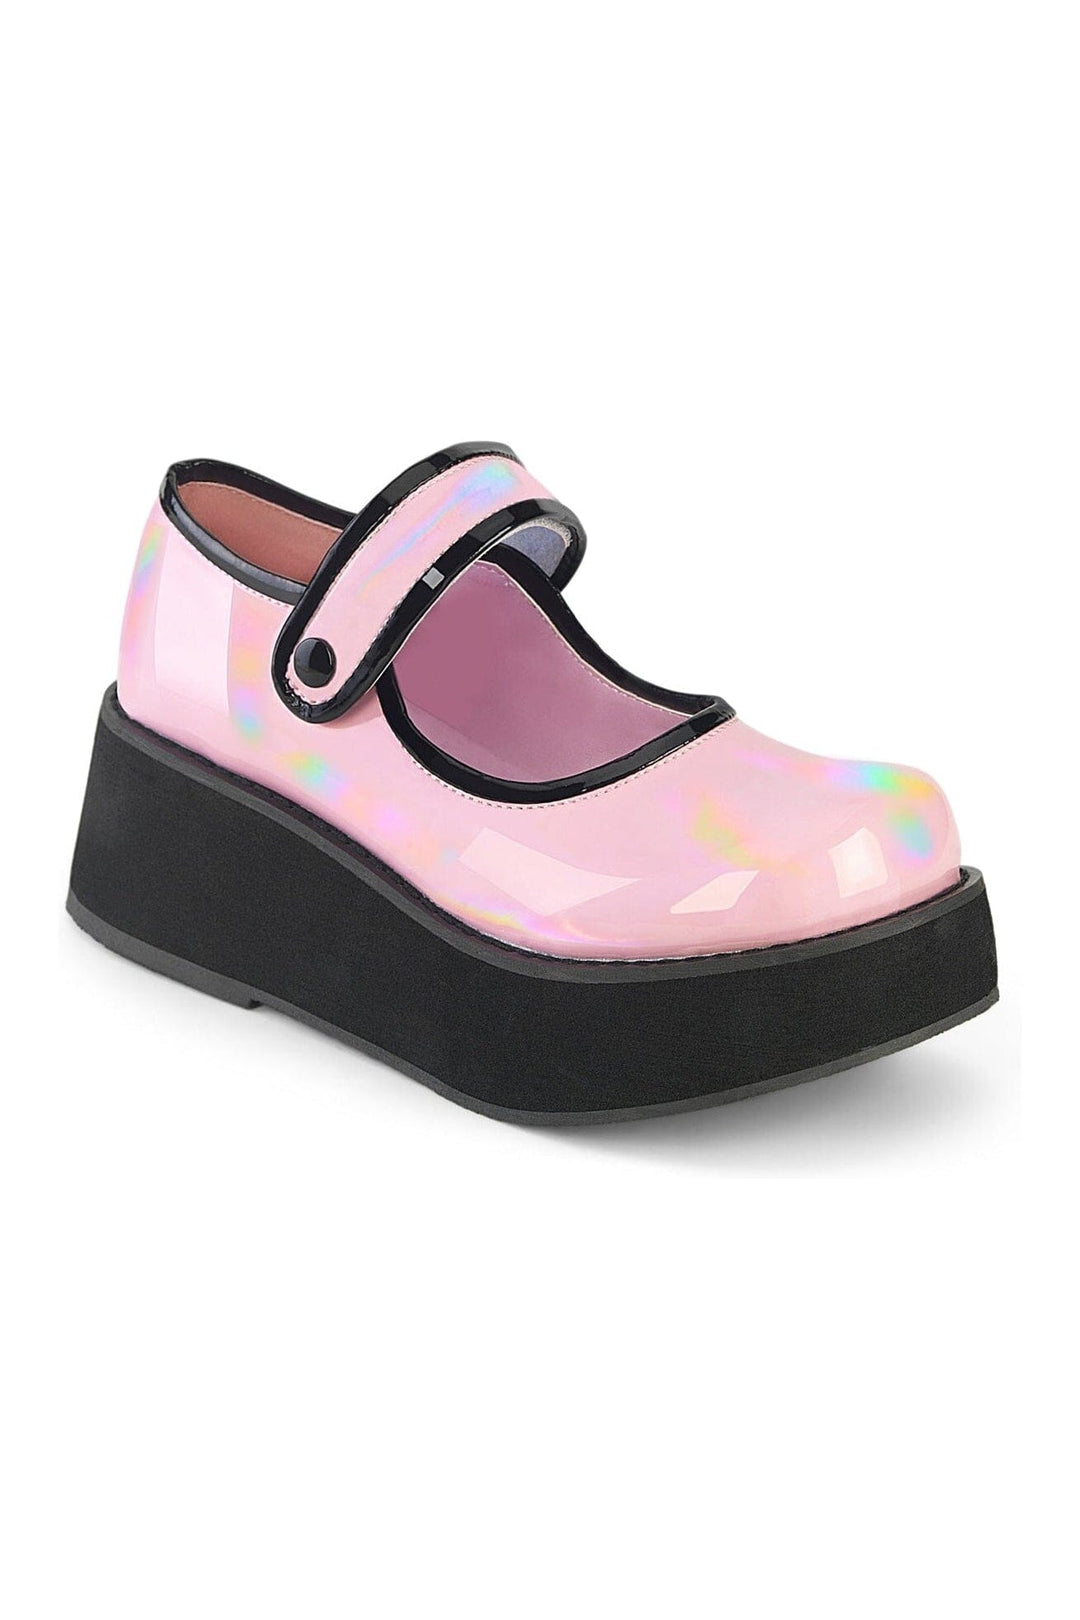 SPRITE-01 Pink Hologram Patent Mary Janes-Mary Janes-Demonia-Pink-10-Hologram Patent-SEXYSHOES.COM